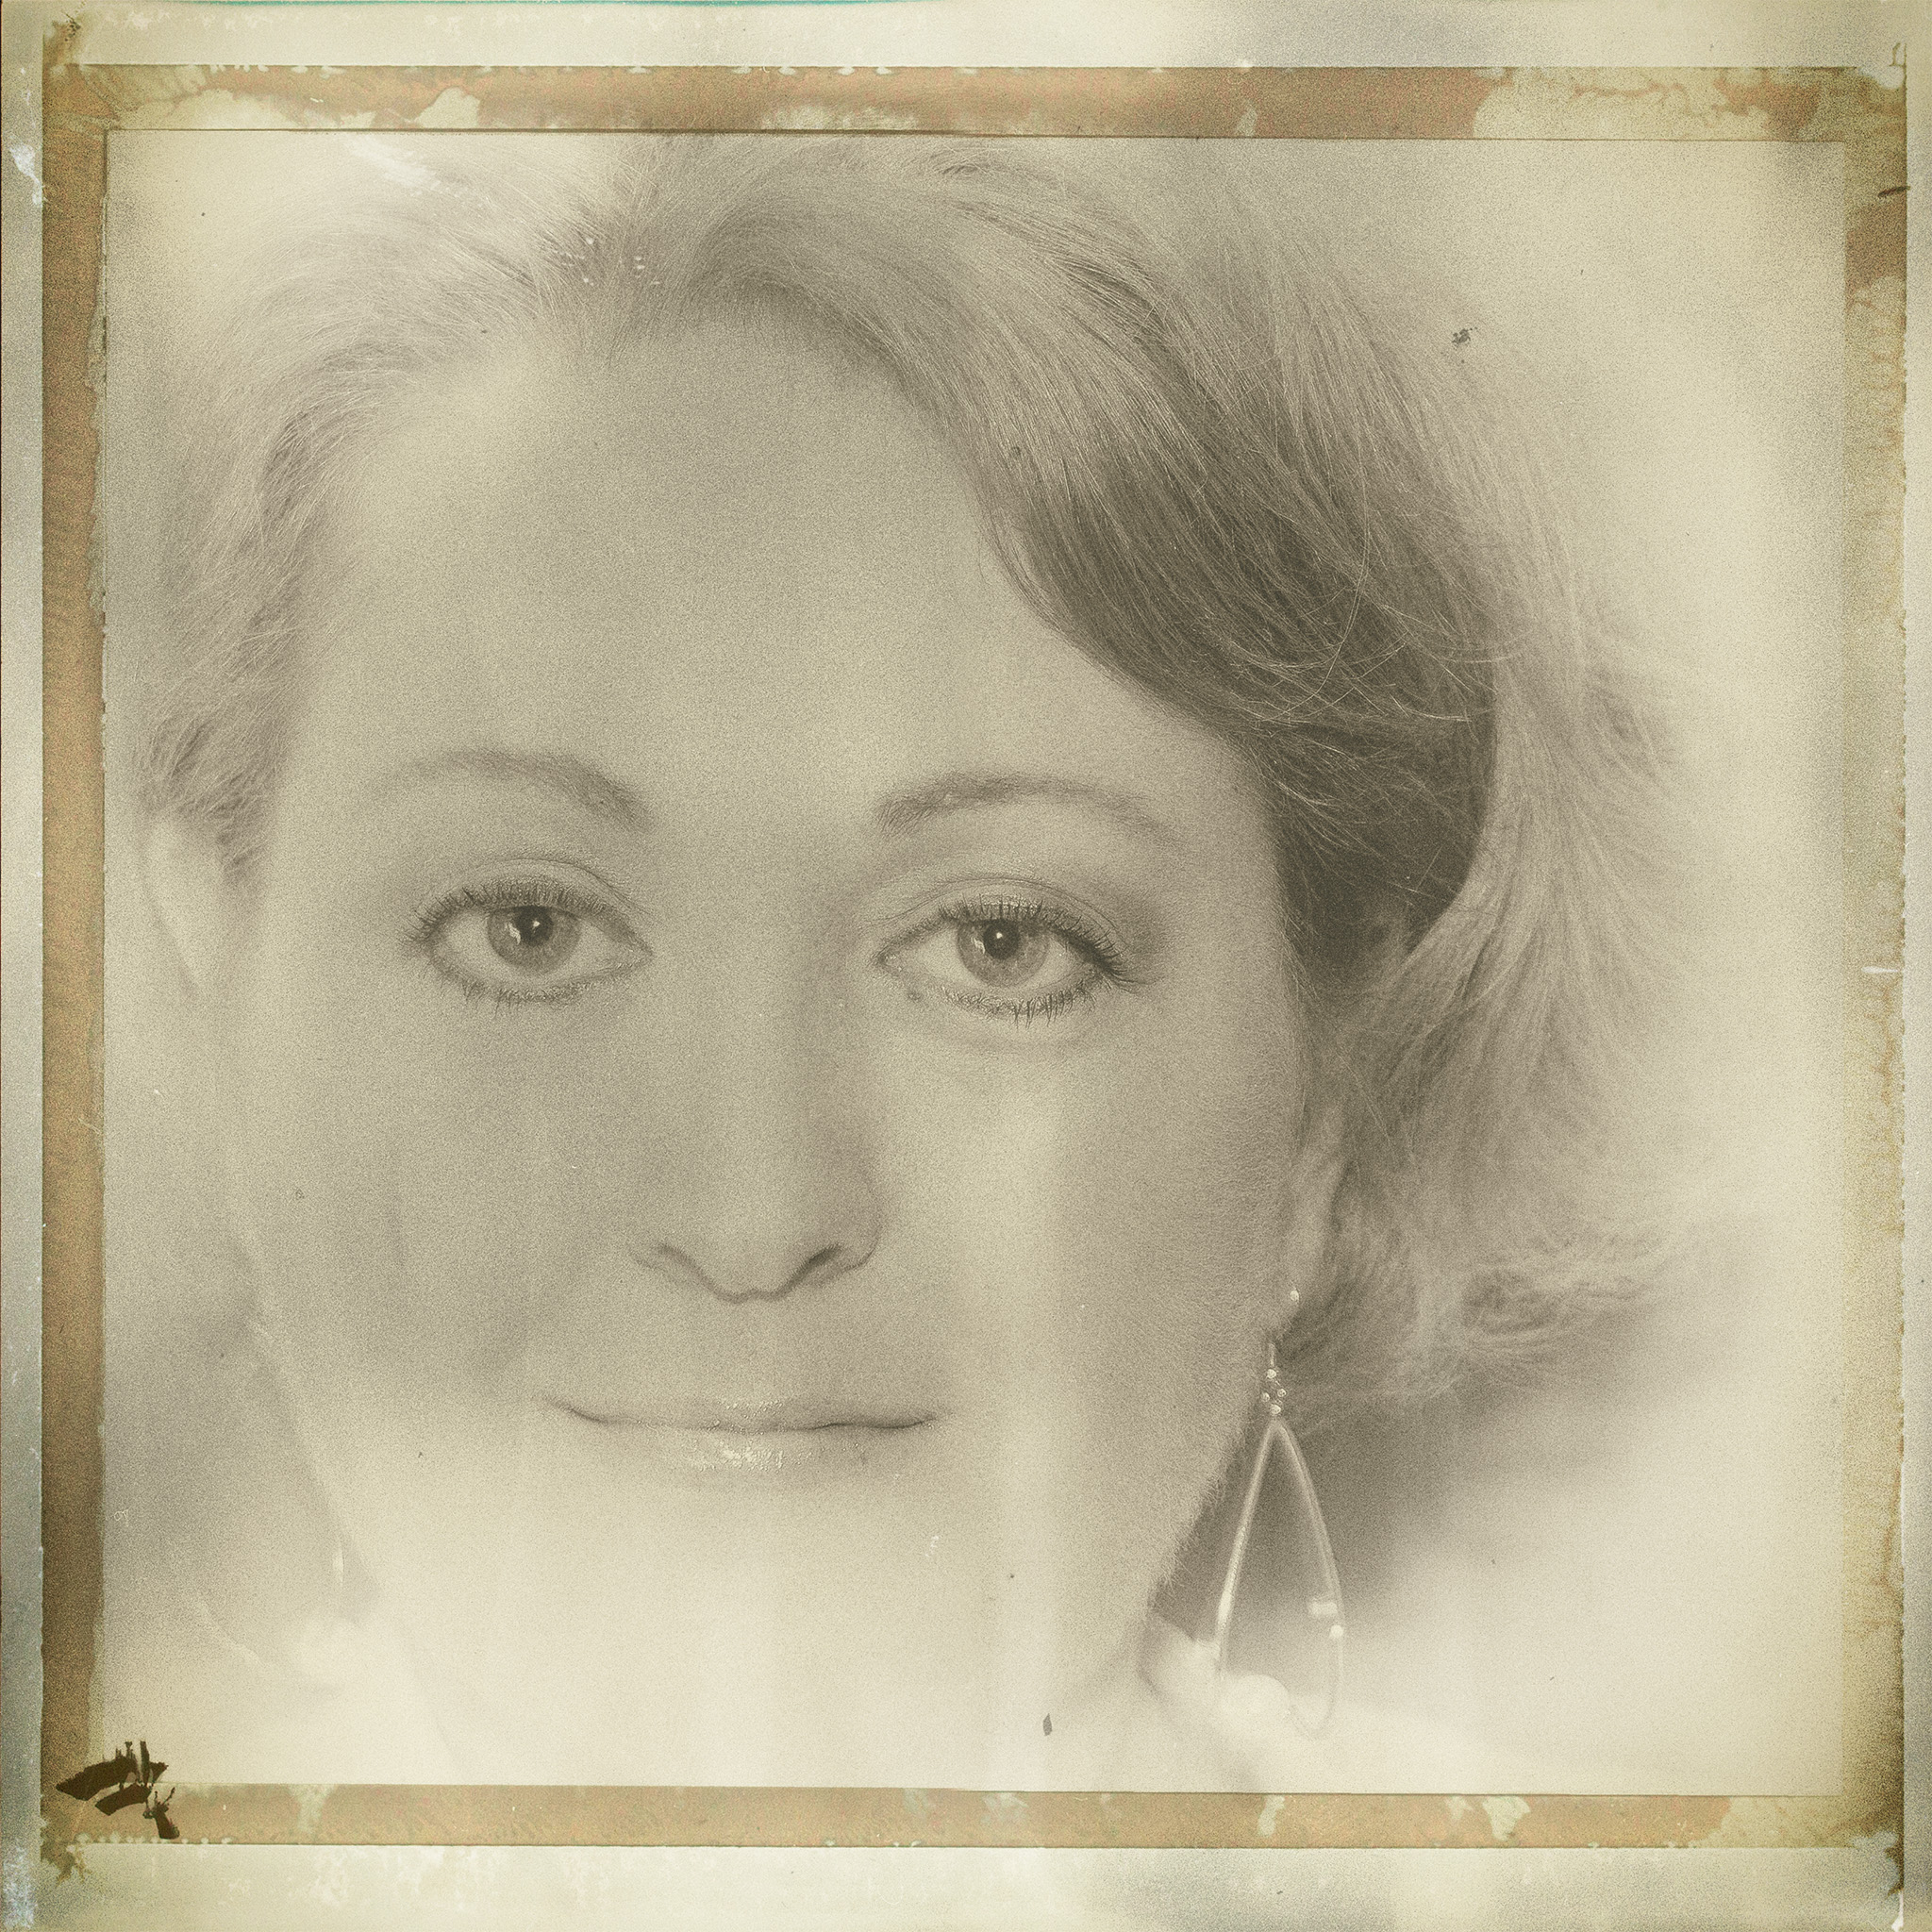 Portrait of my wife Kicki, processed to look like an old wetplate print